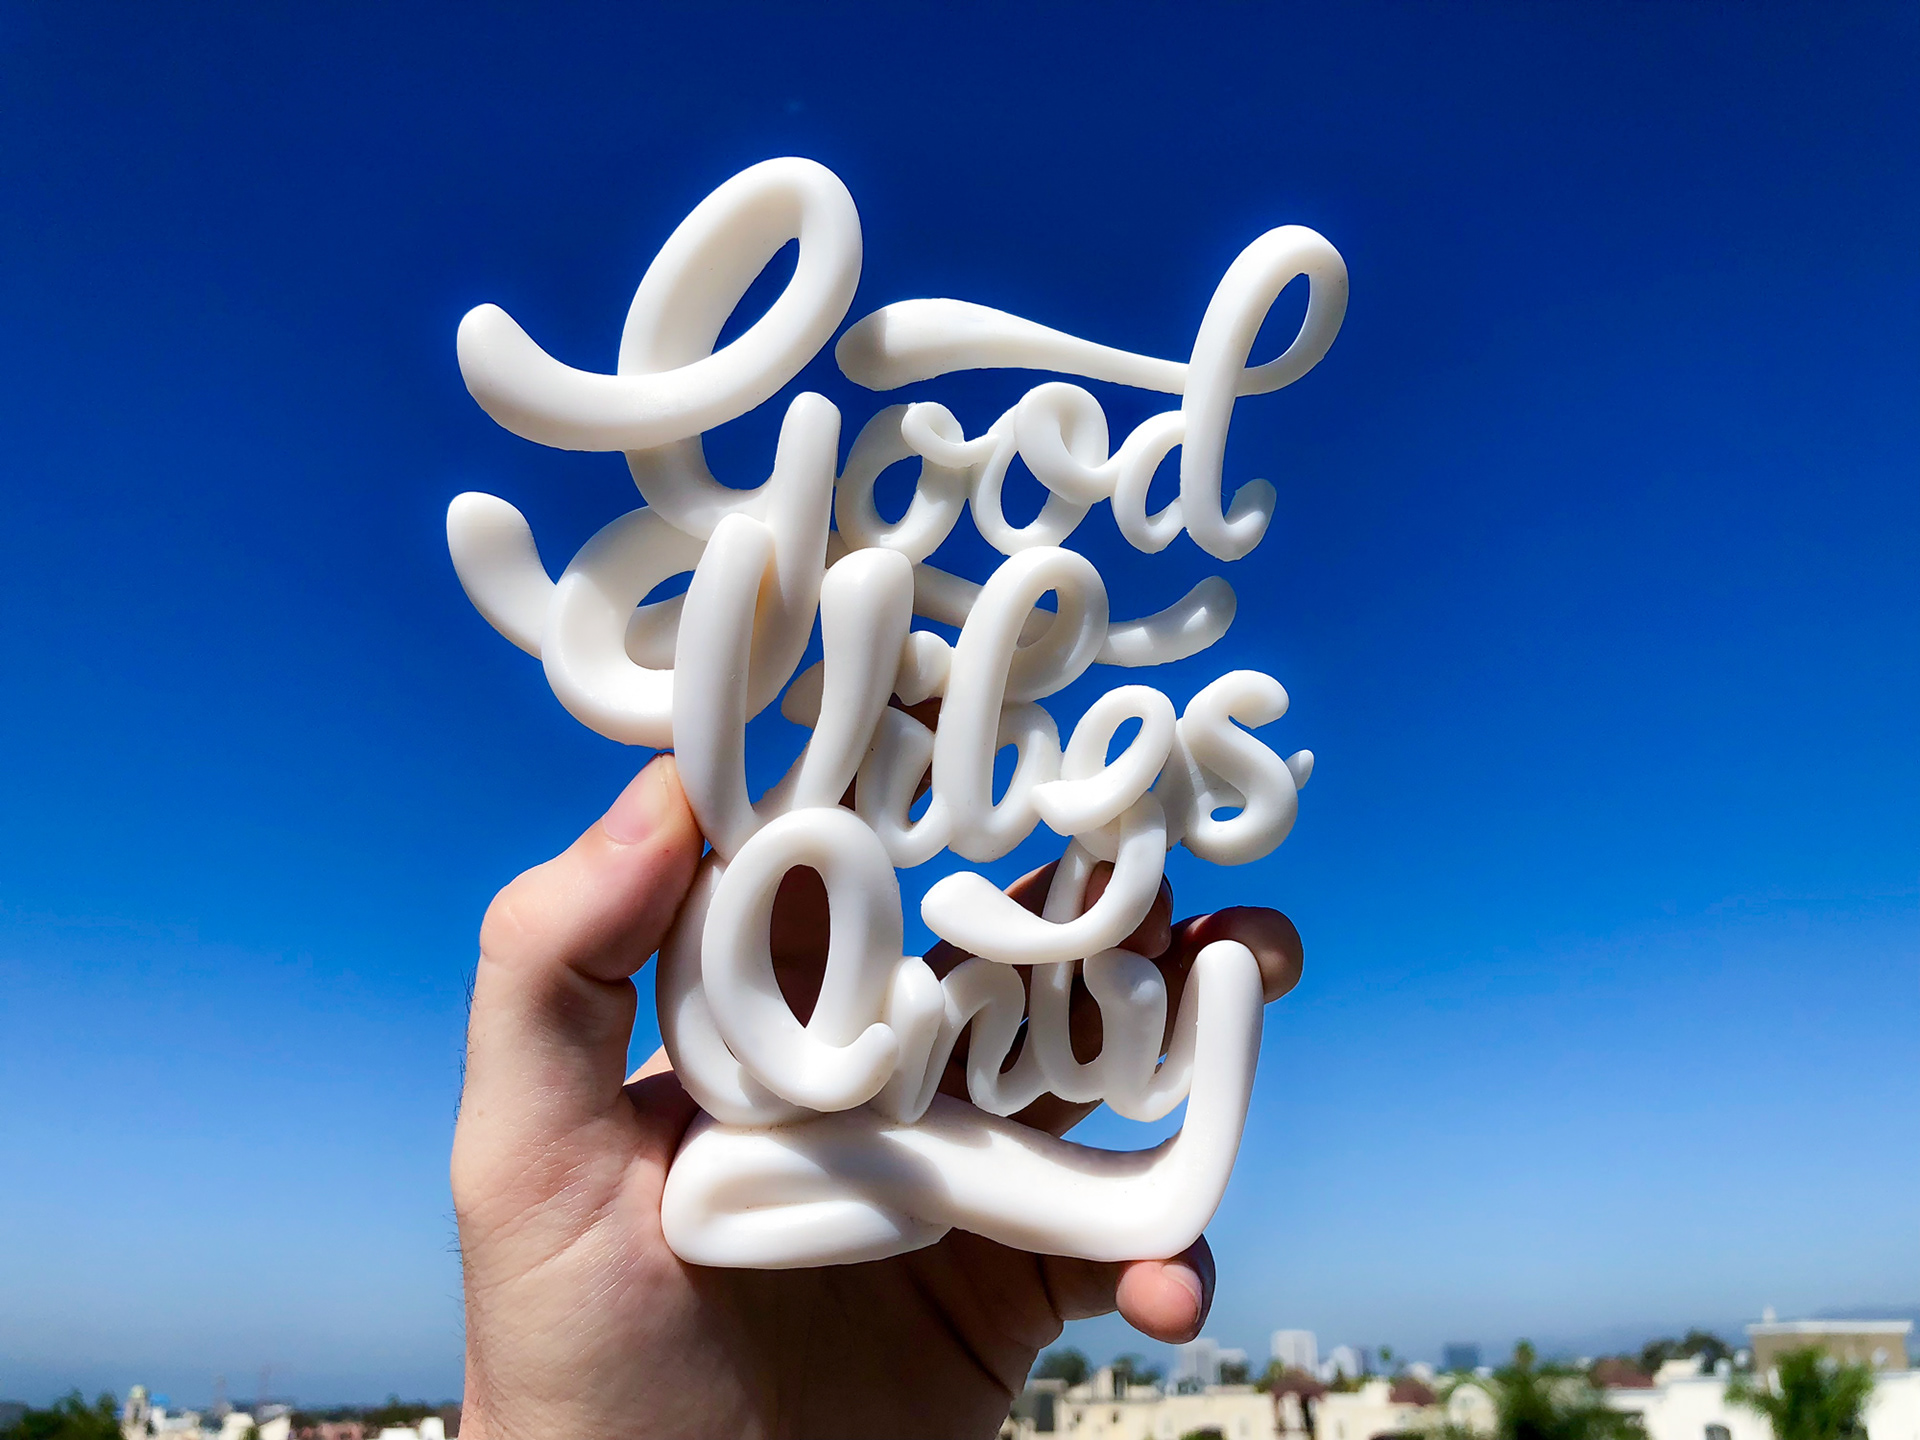 Only 3d. Каллиграфия и 3д скульптуры. Good Vibes. Steady as she goes, a 3d Printed typographic Sculpture. Letters 3d Printing.